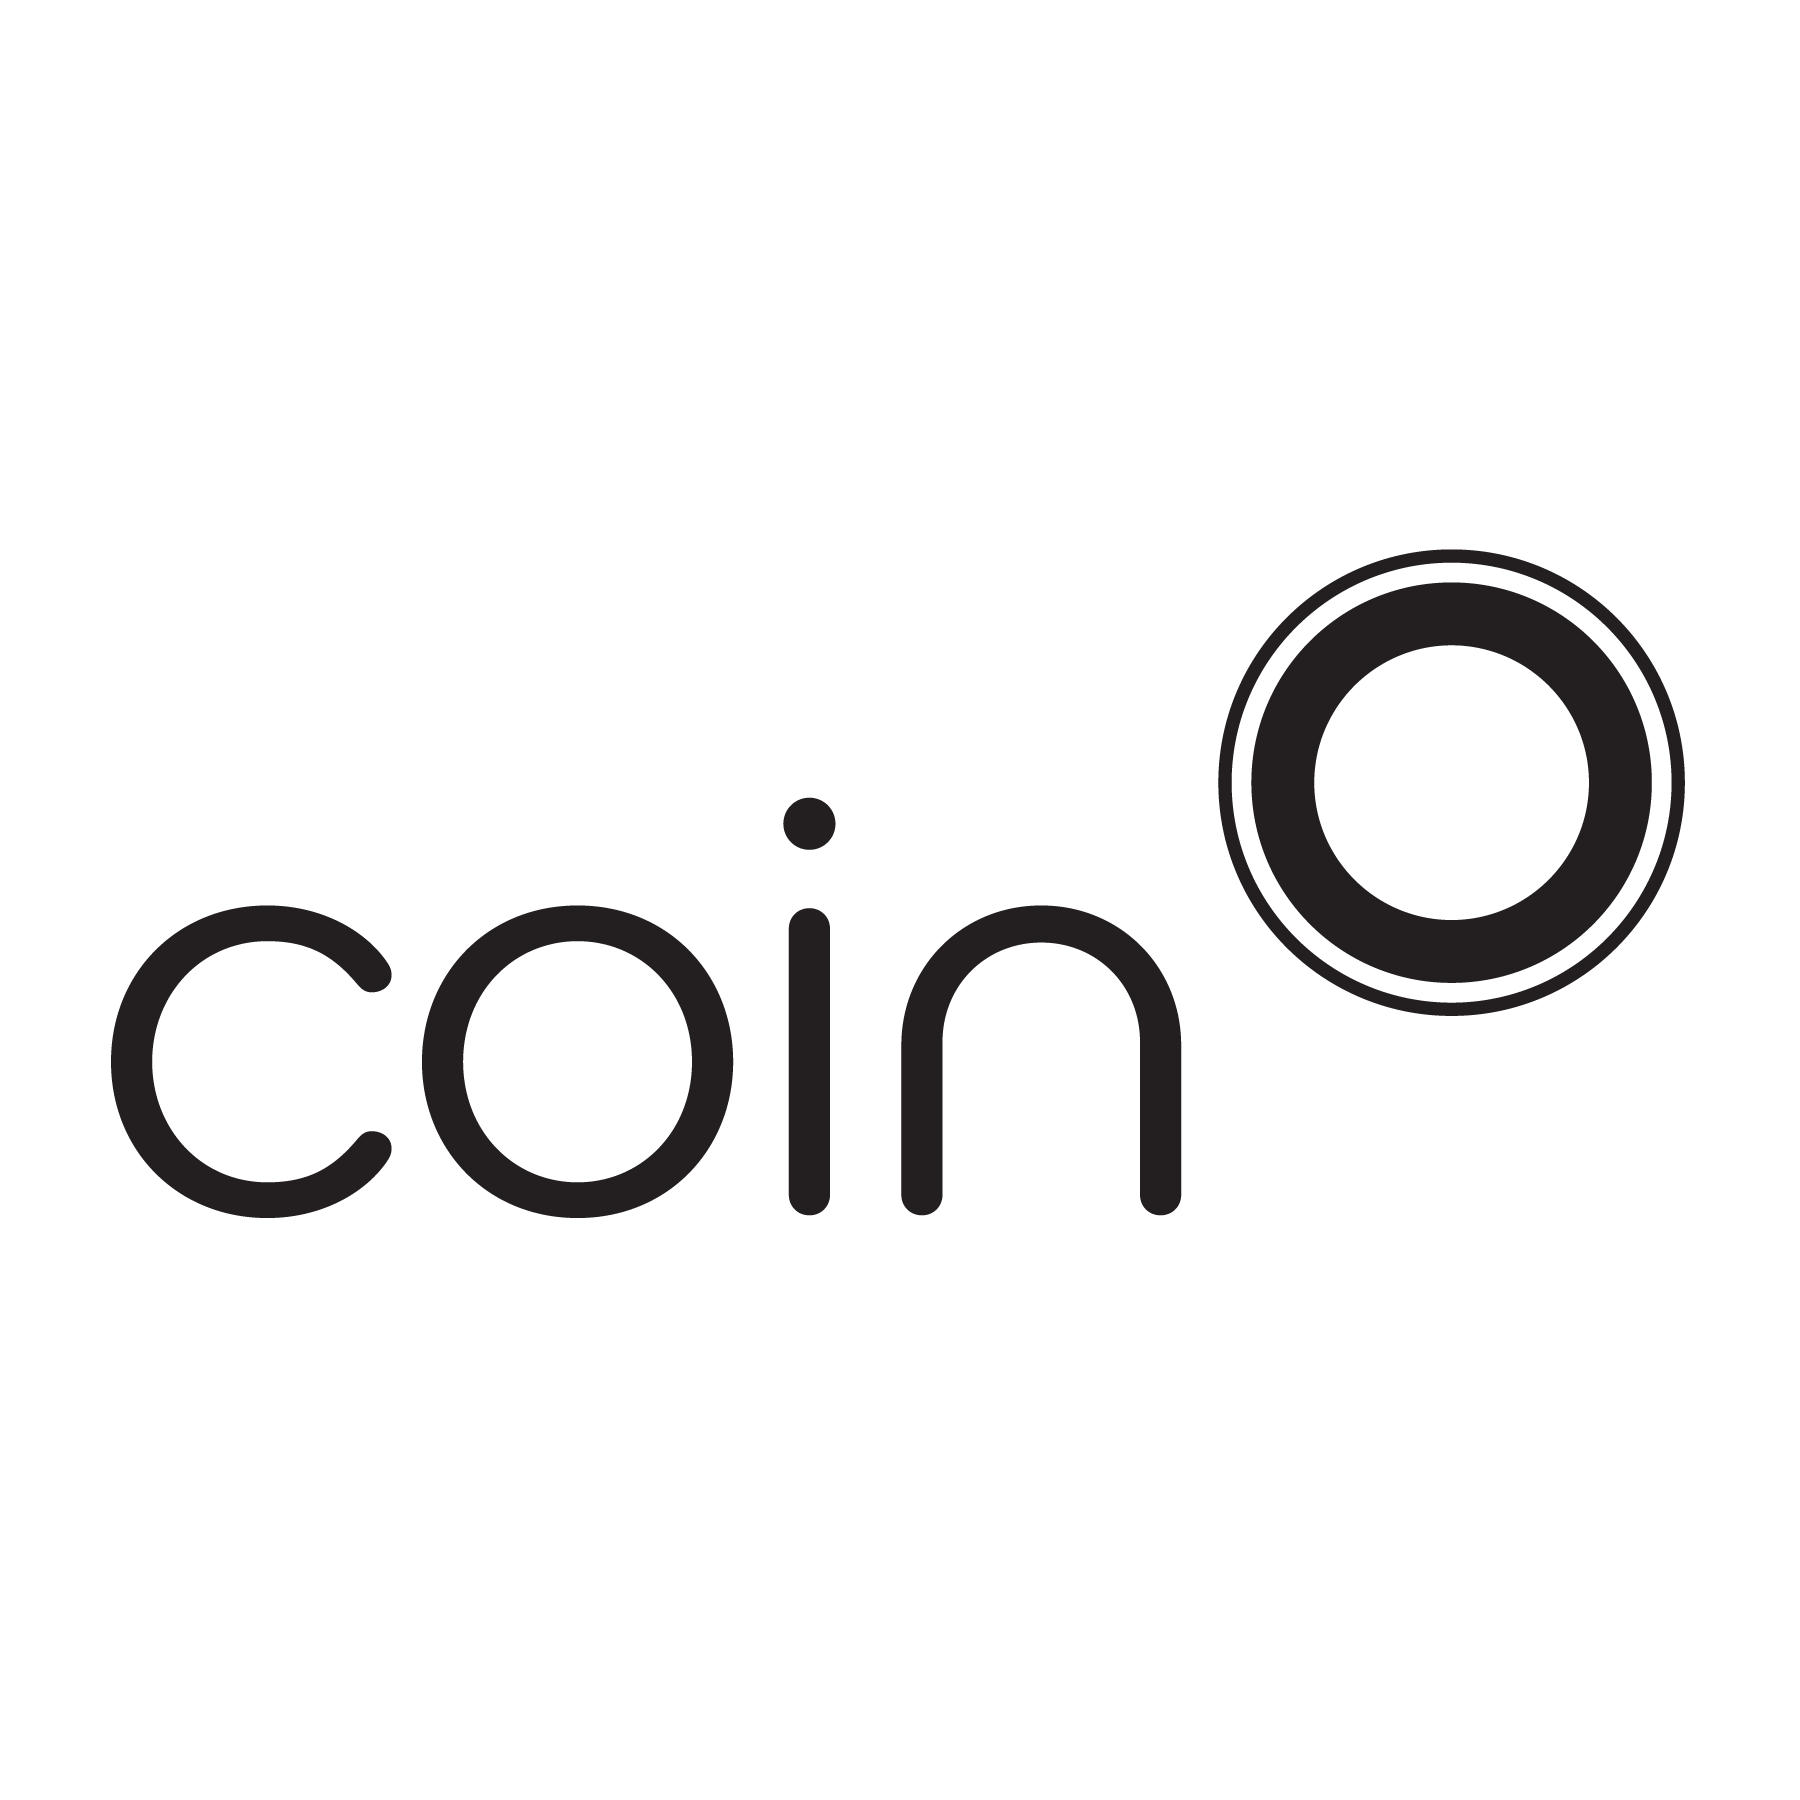 Coin is Trying to Bring Credit Card Payments into the Future